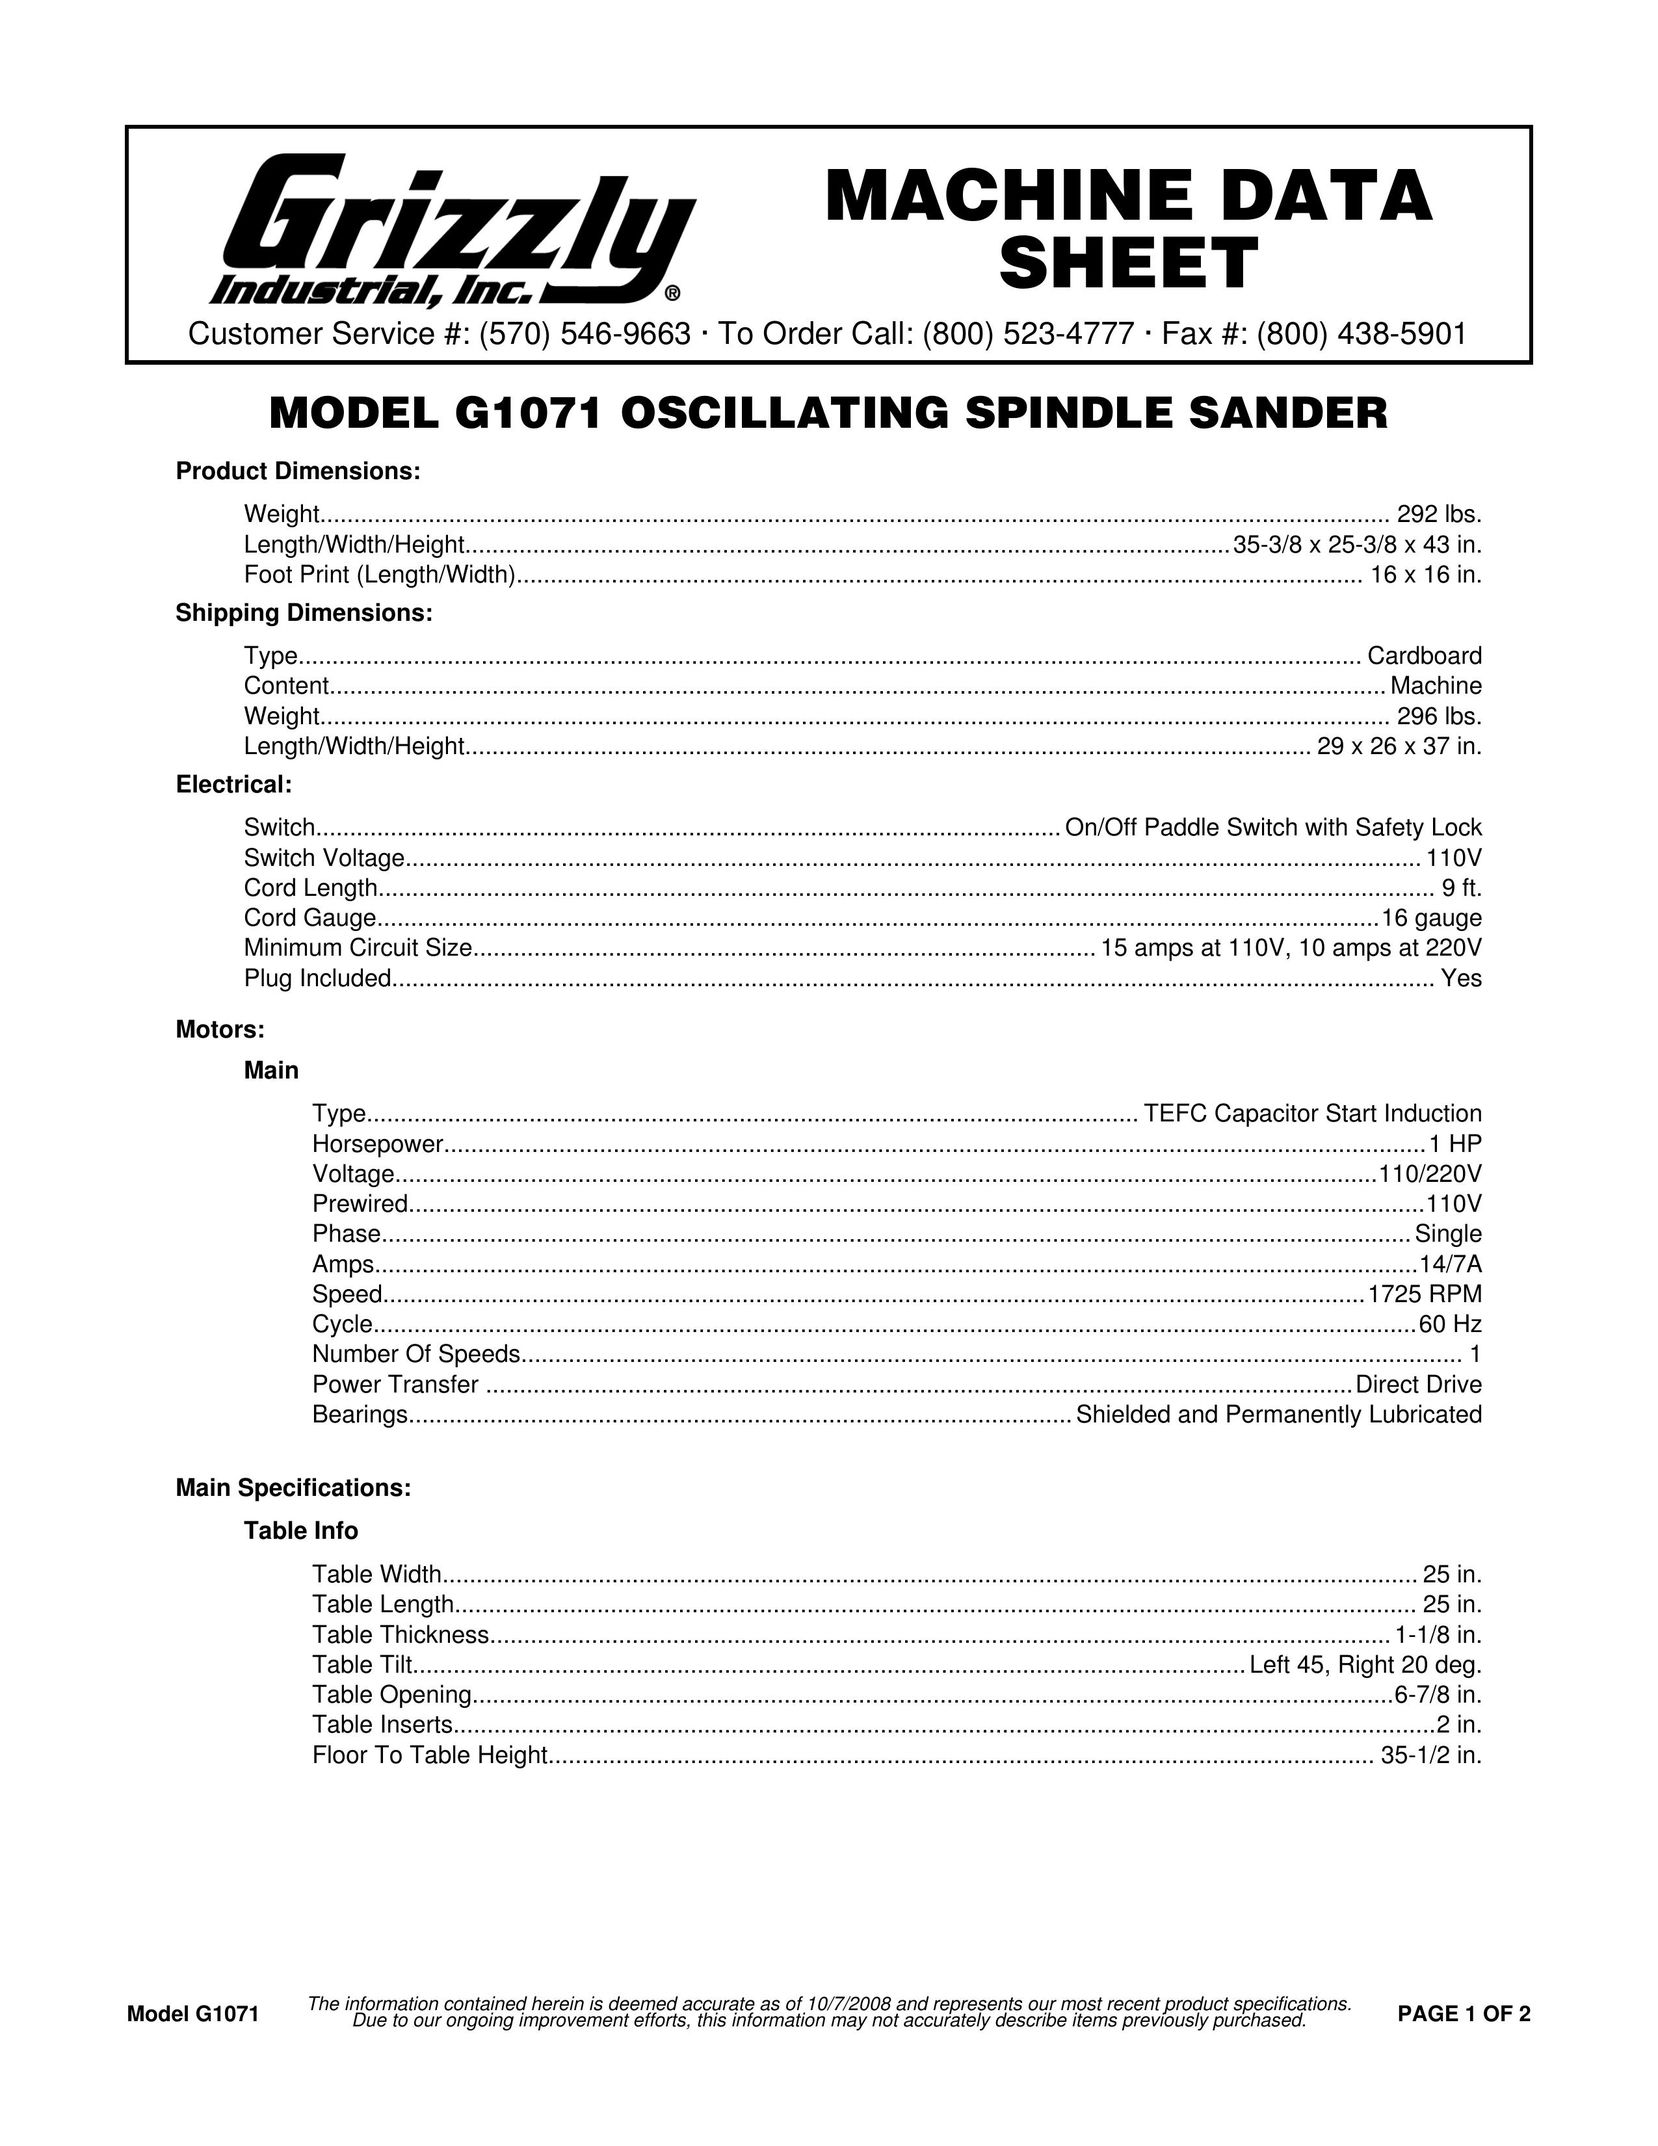 Grizzly G1071 Sander User Manual